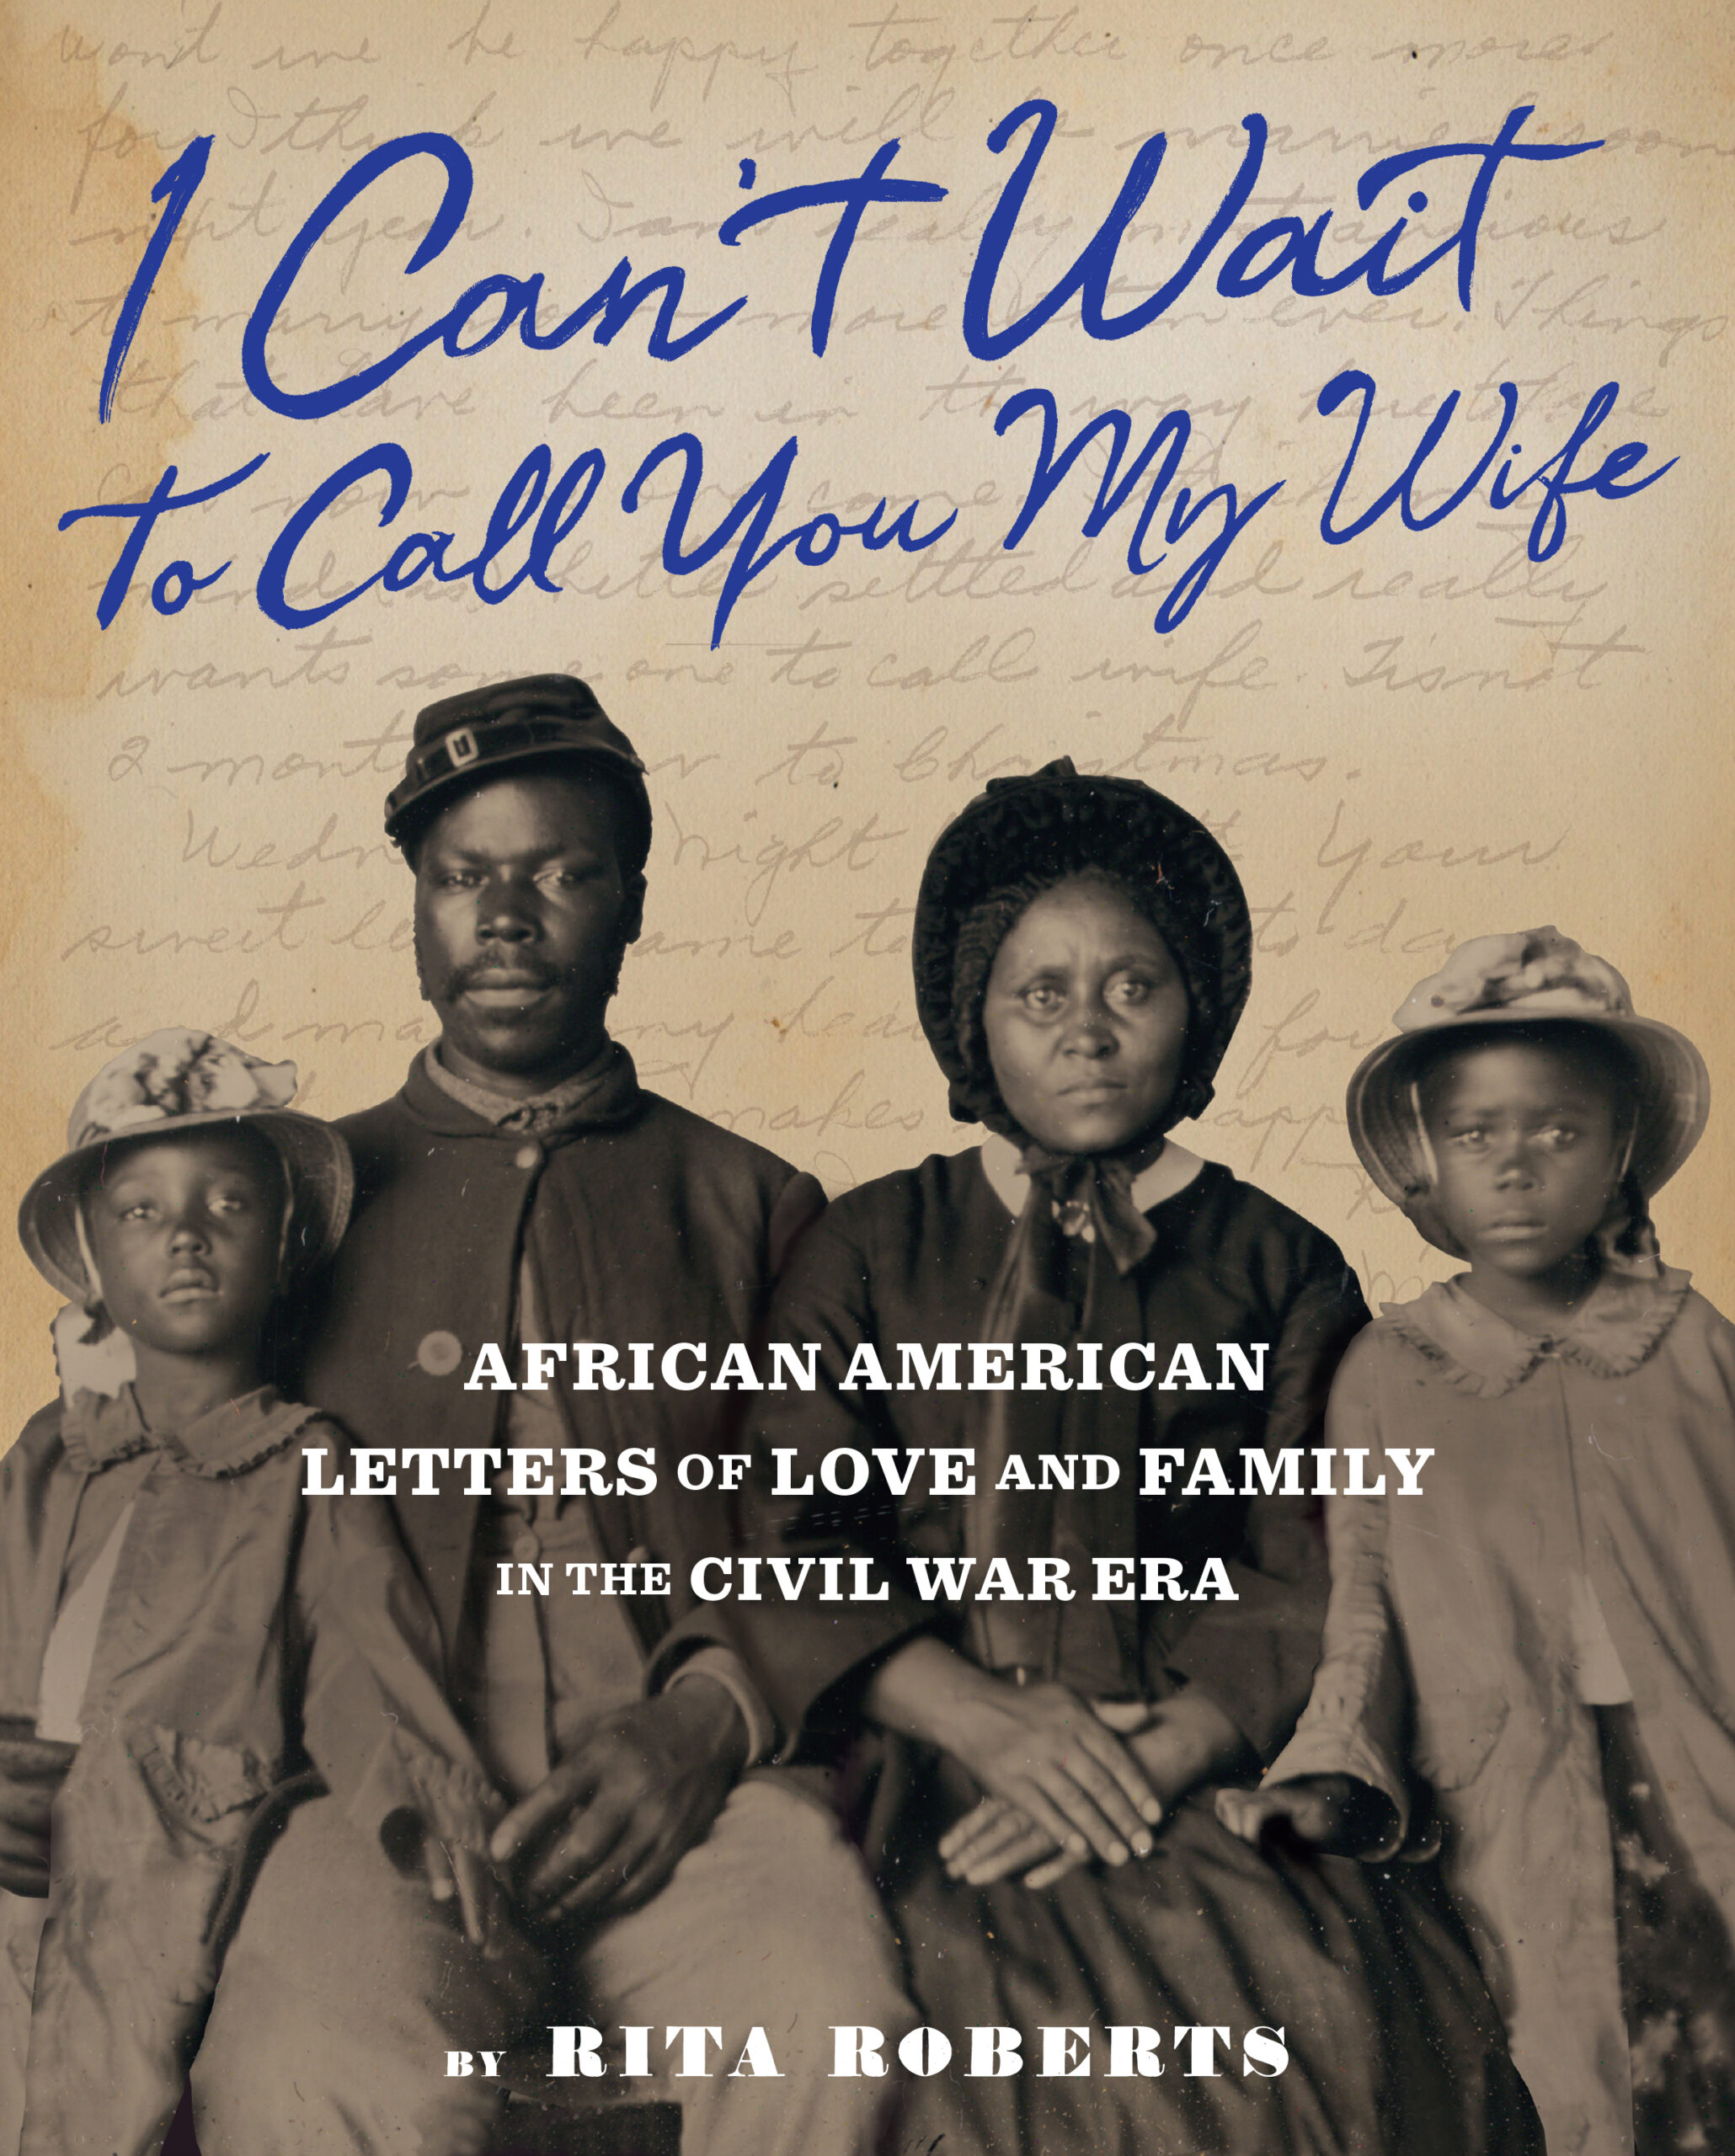 “I Can’t Wait to Call You My Wife”: African American Letters of Love & Family in the Civil War Era